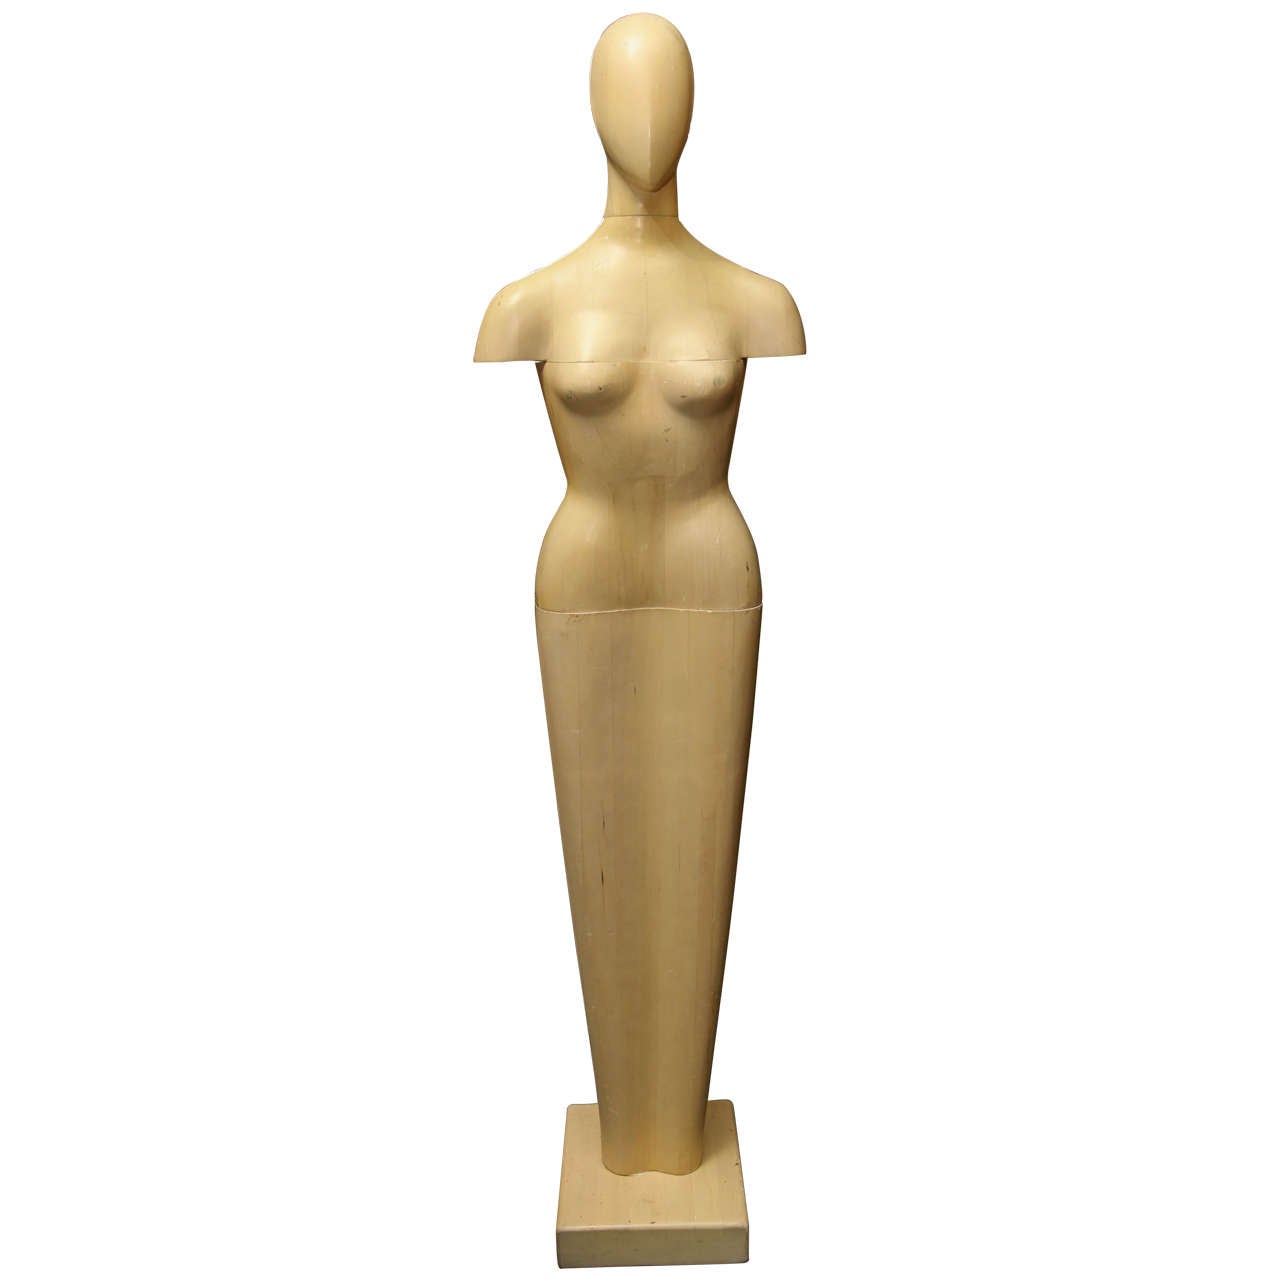 Life-Size Wood Sculpture of Female Form